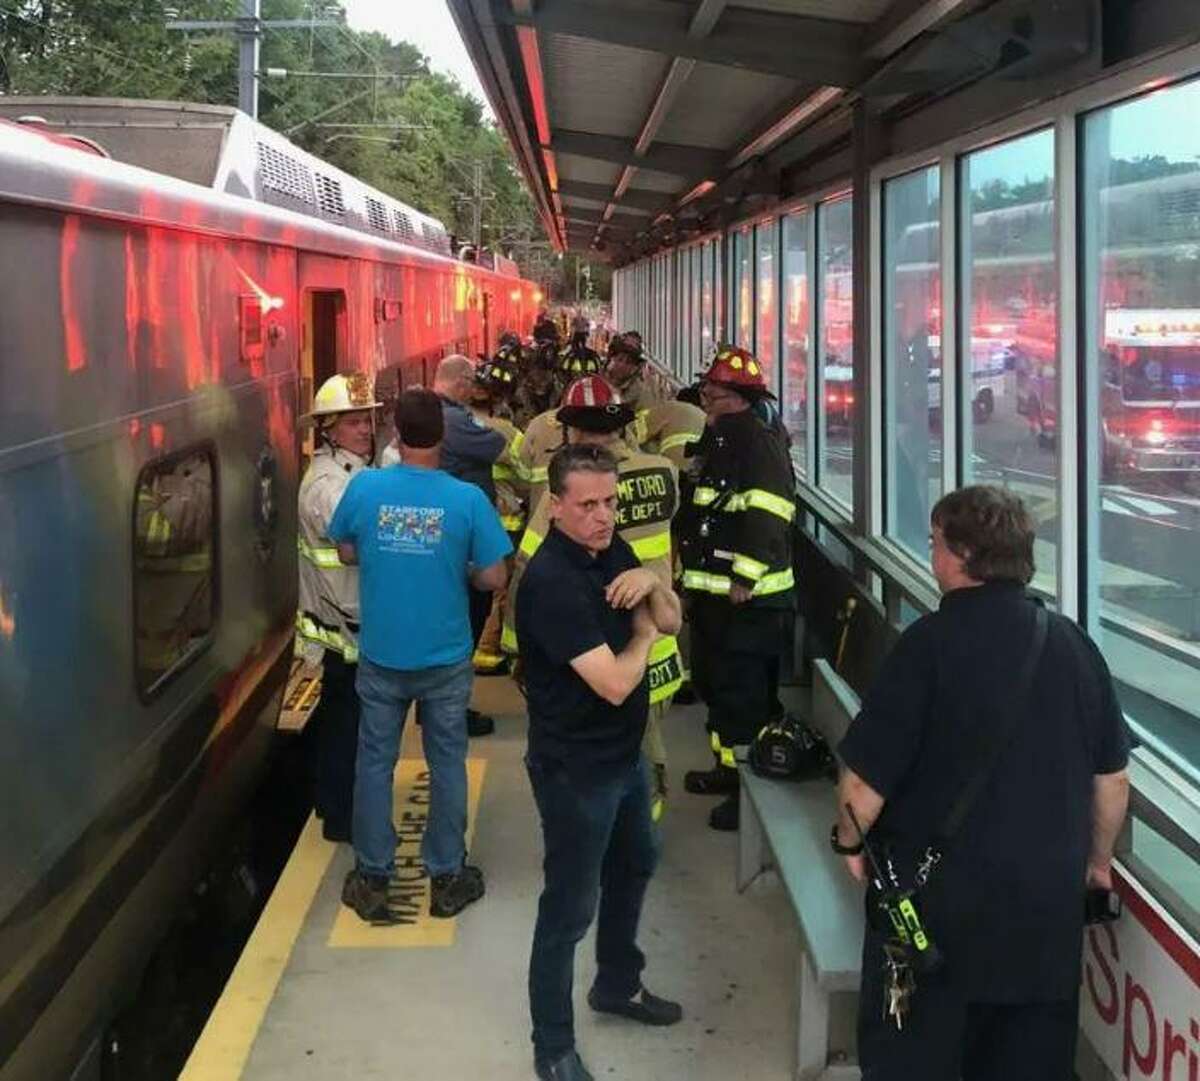 First responders rescued a woman who fell between the train and platform at the Springdail Train State on Hope Street Tuesday night.